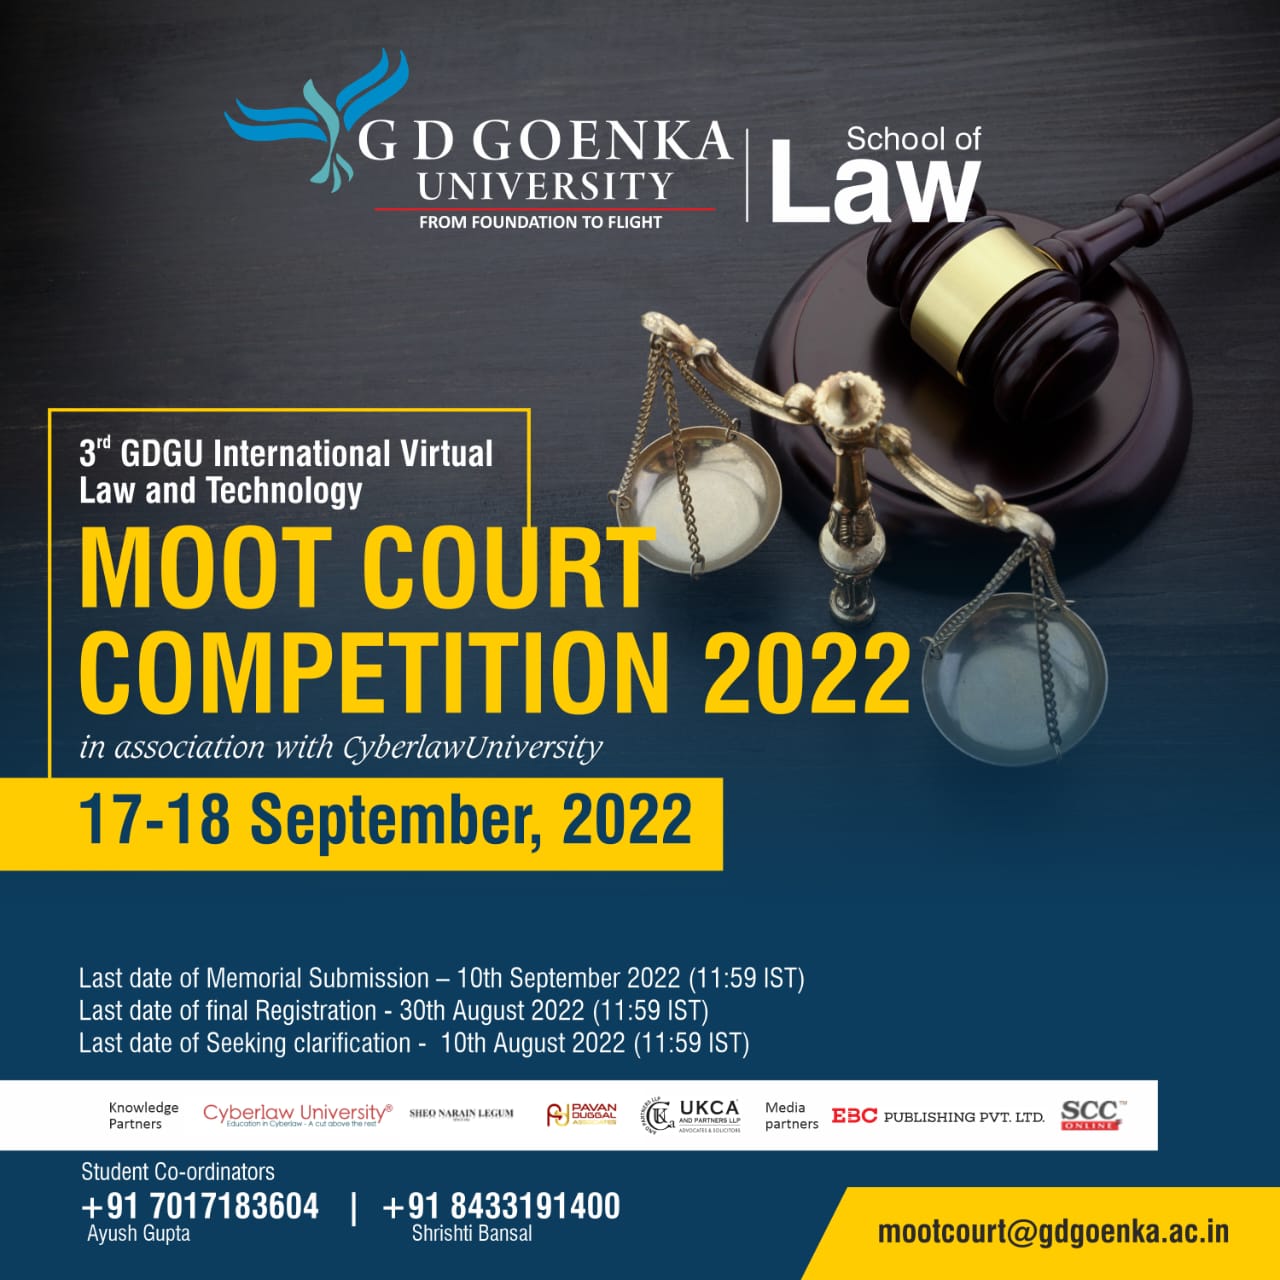 3rd GD Goenka International Virtual Law and Technology Moot Court Competition, 2022 SCC Times